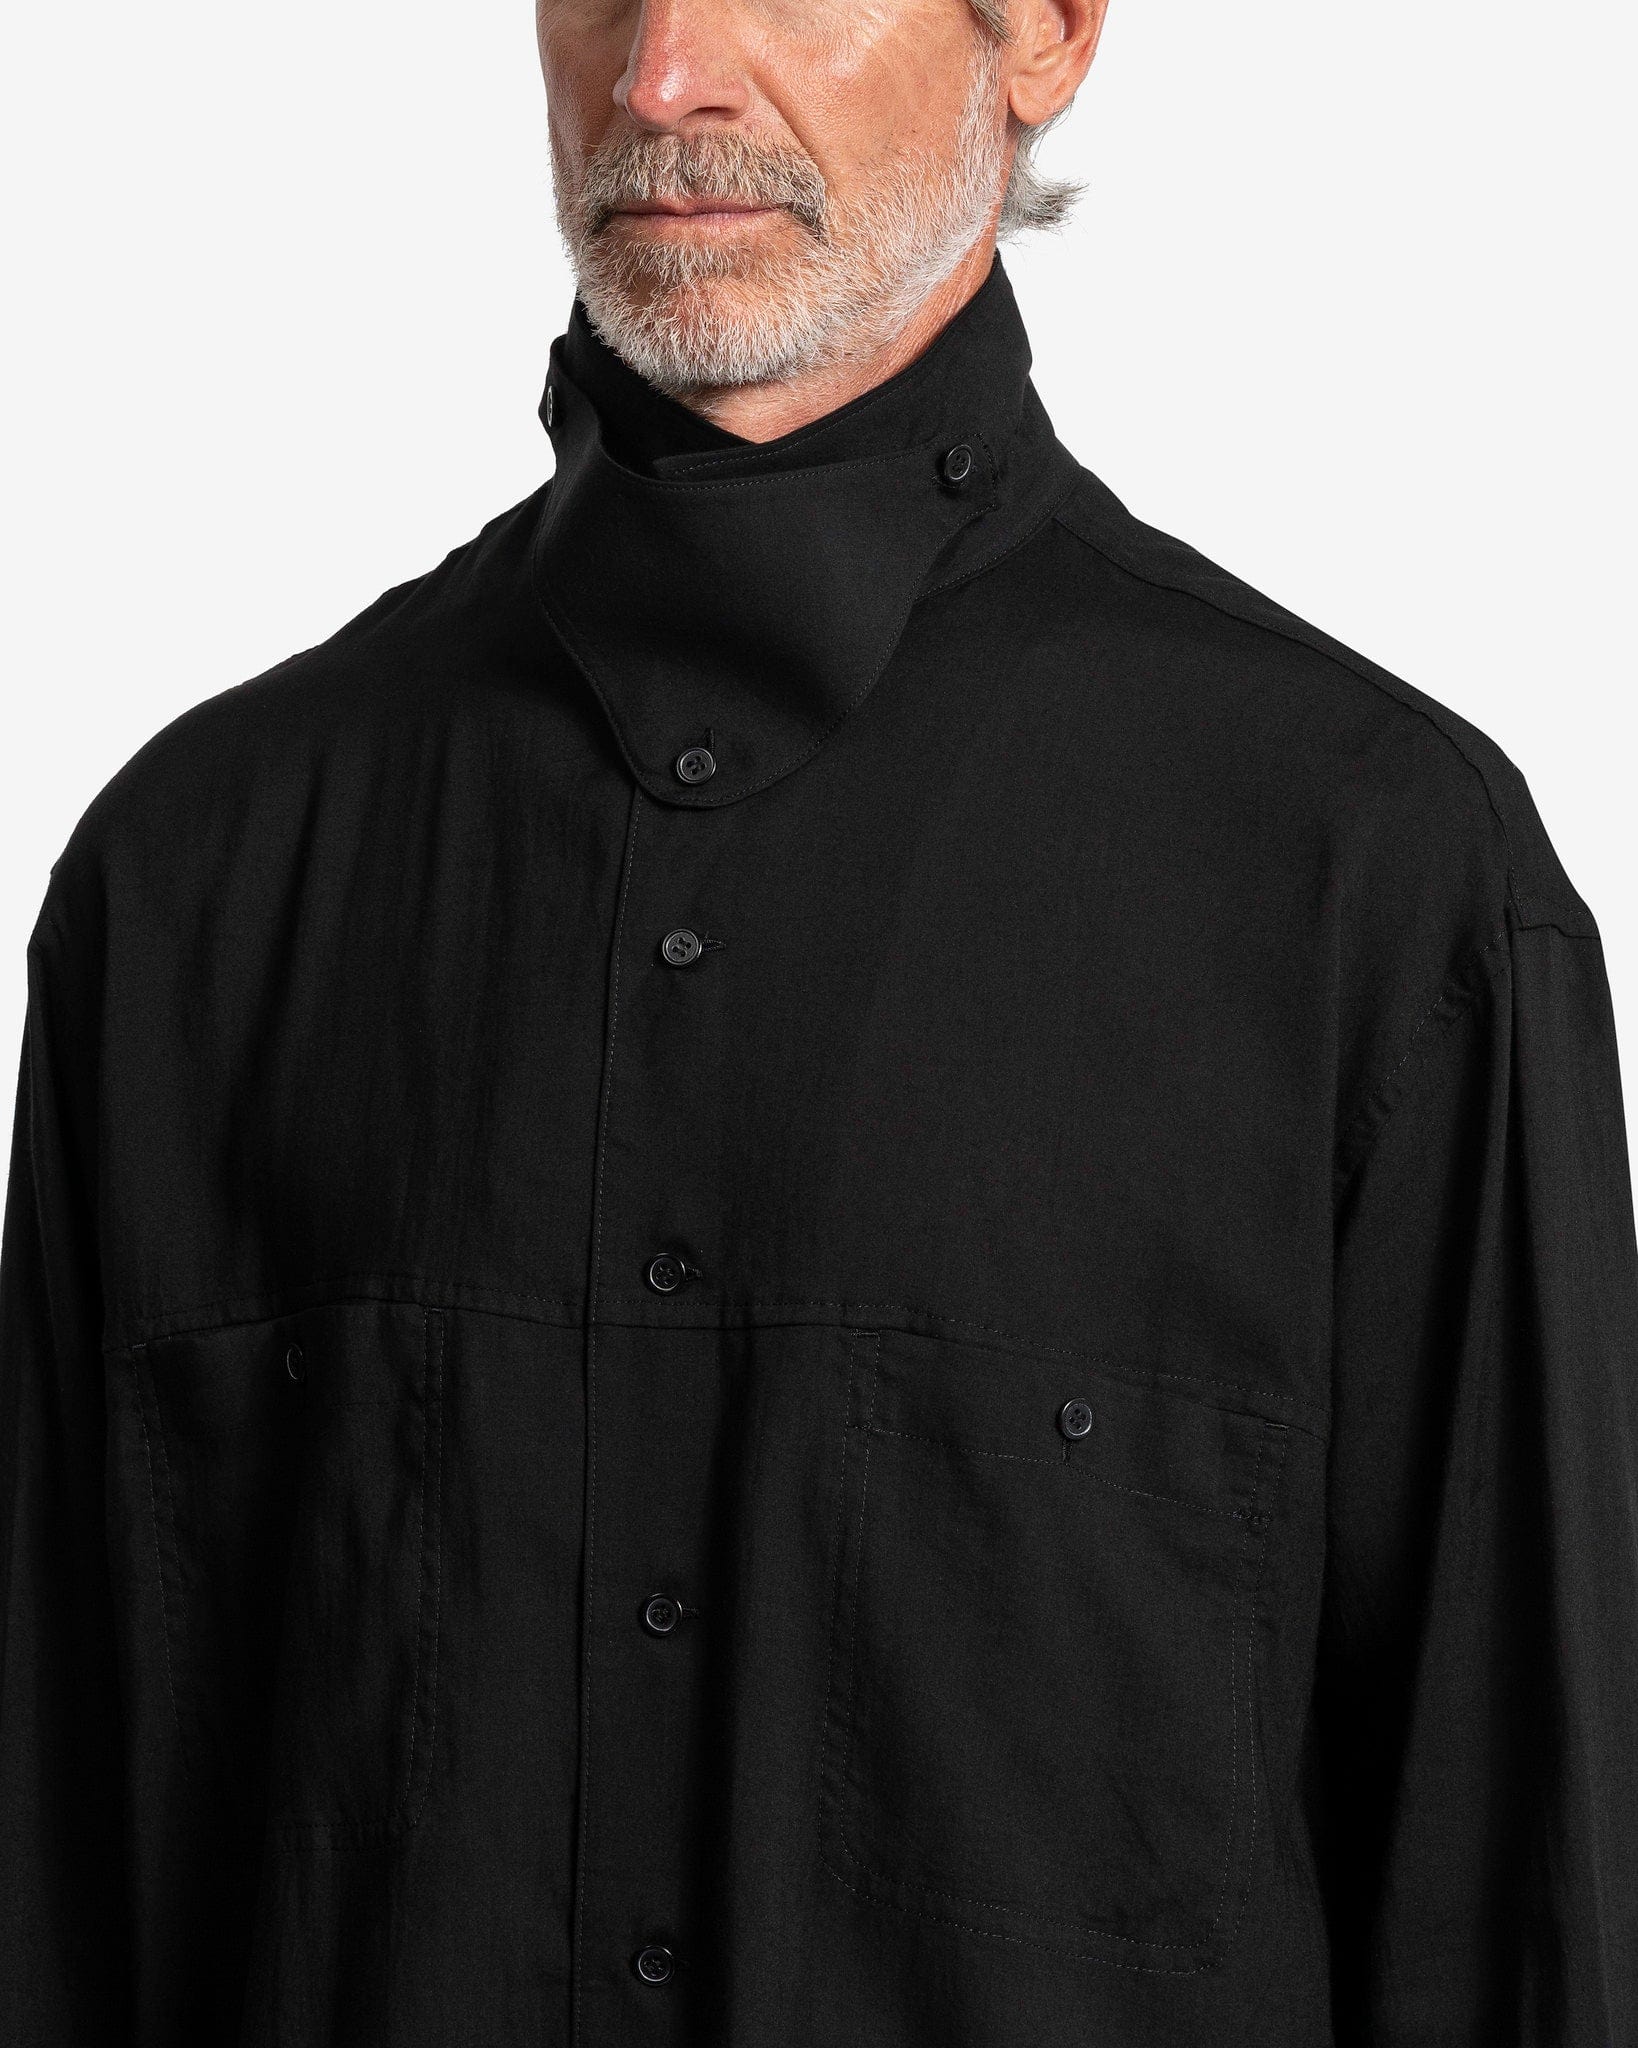 Open Collar Shirt with Chin Flap